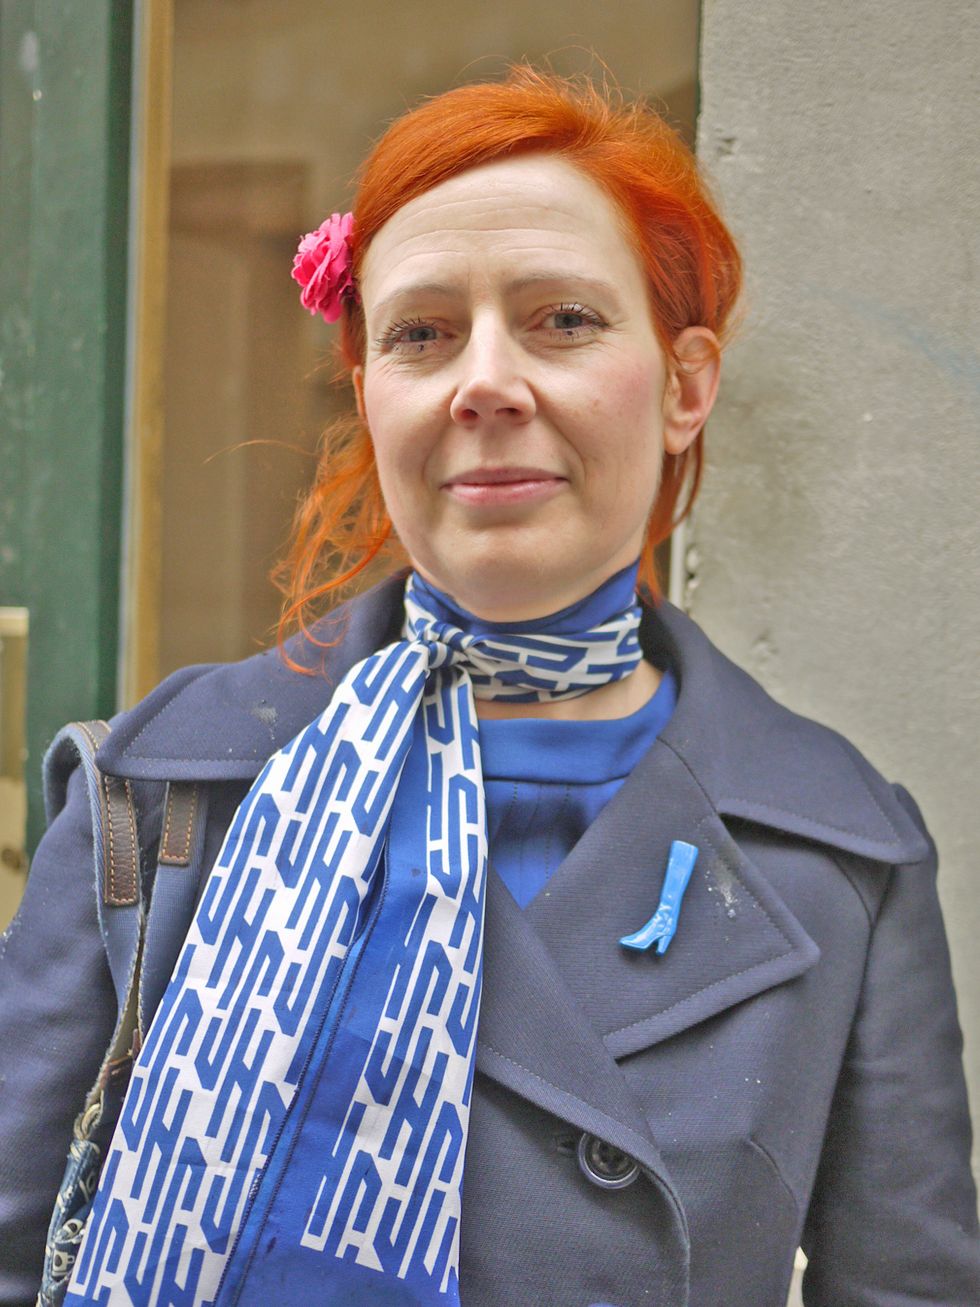 Hairstyle, Collar, Style, Red hair, Street fashion, Fashion, Electric blue, Blazer, Hair coloring, Jacket, 